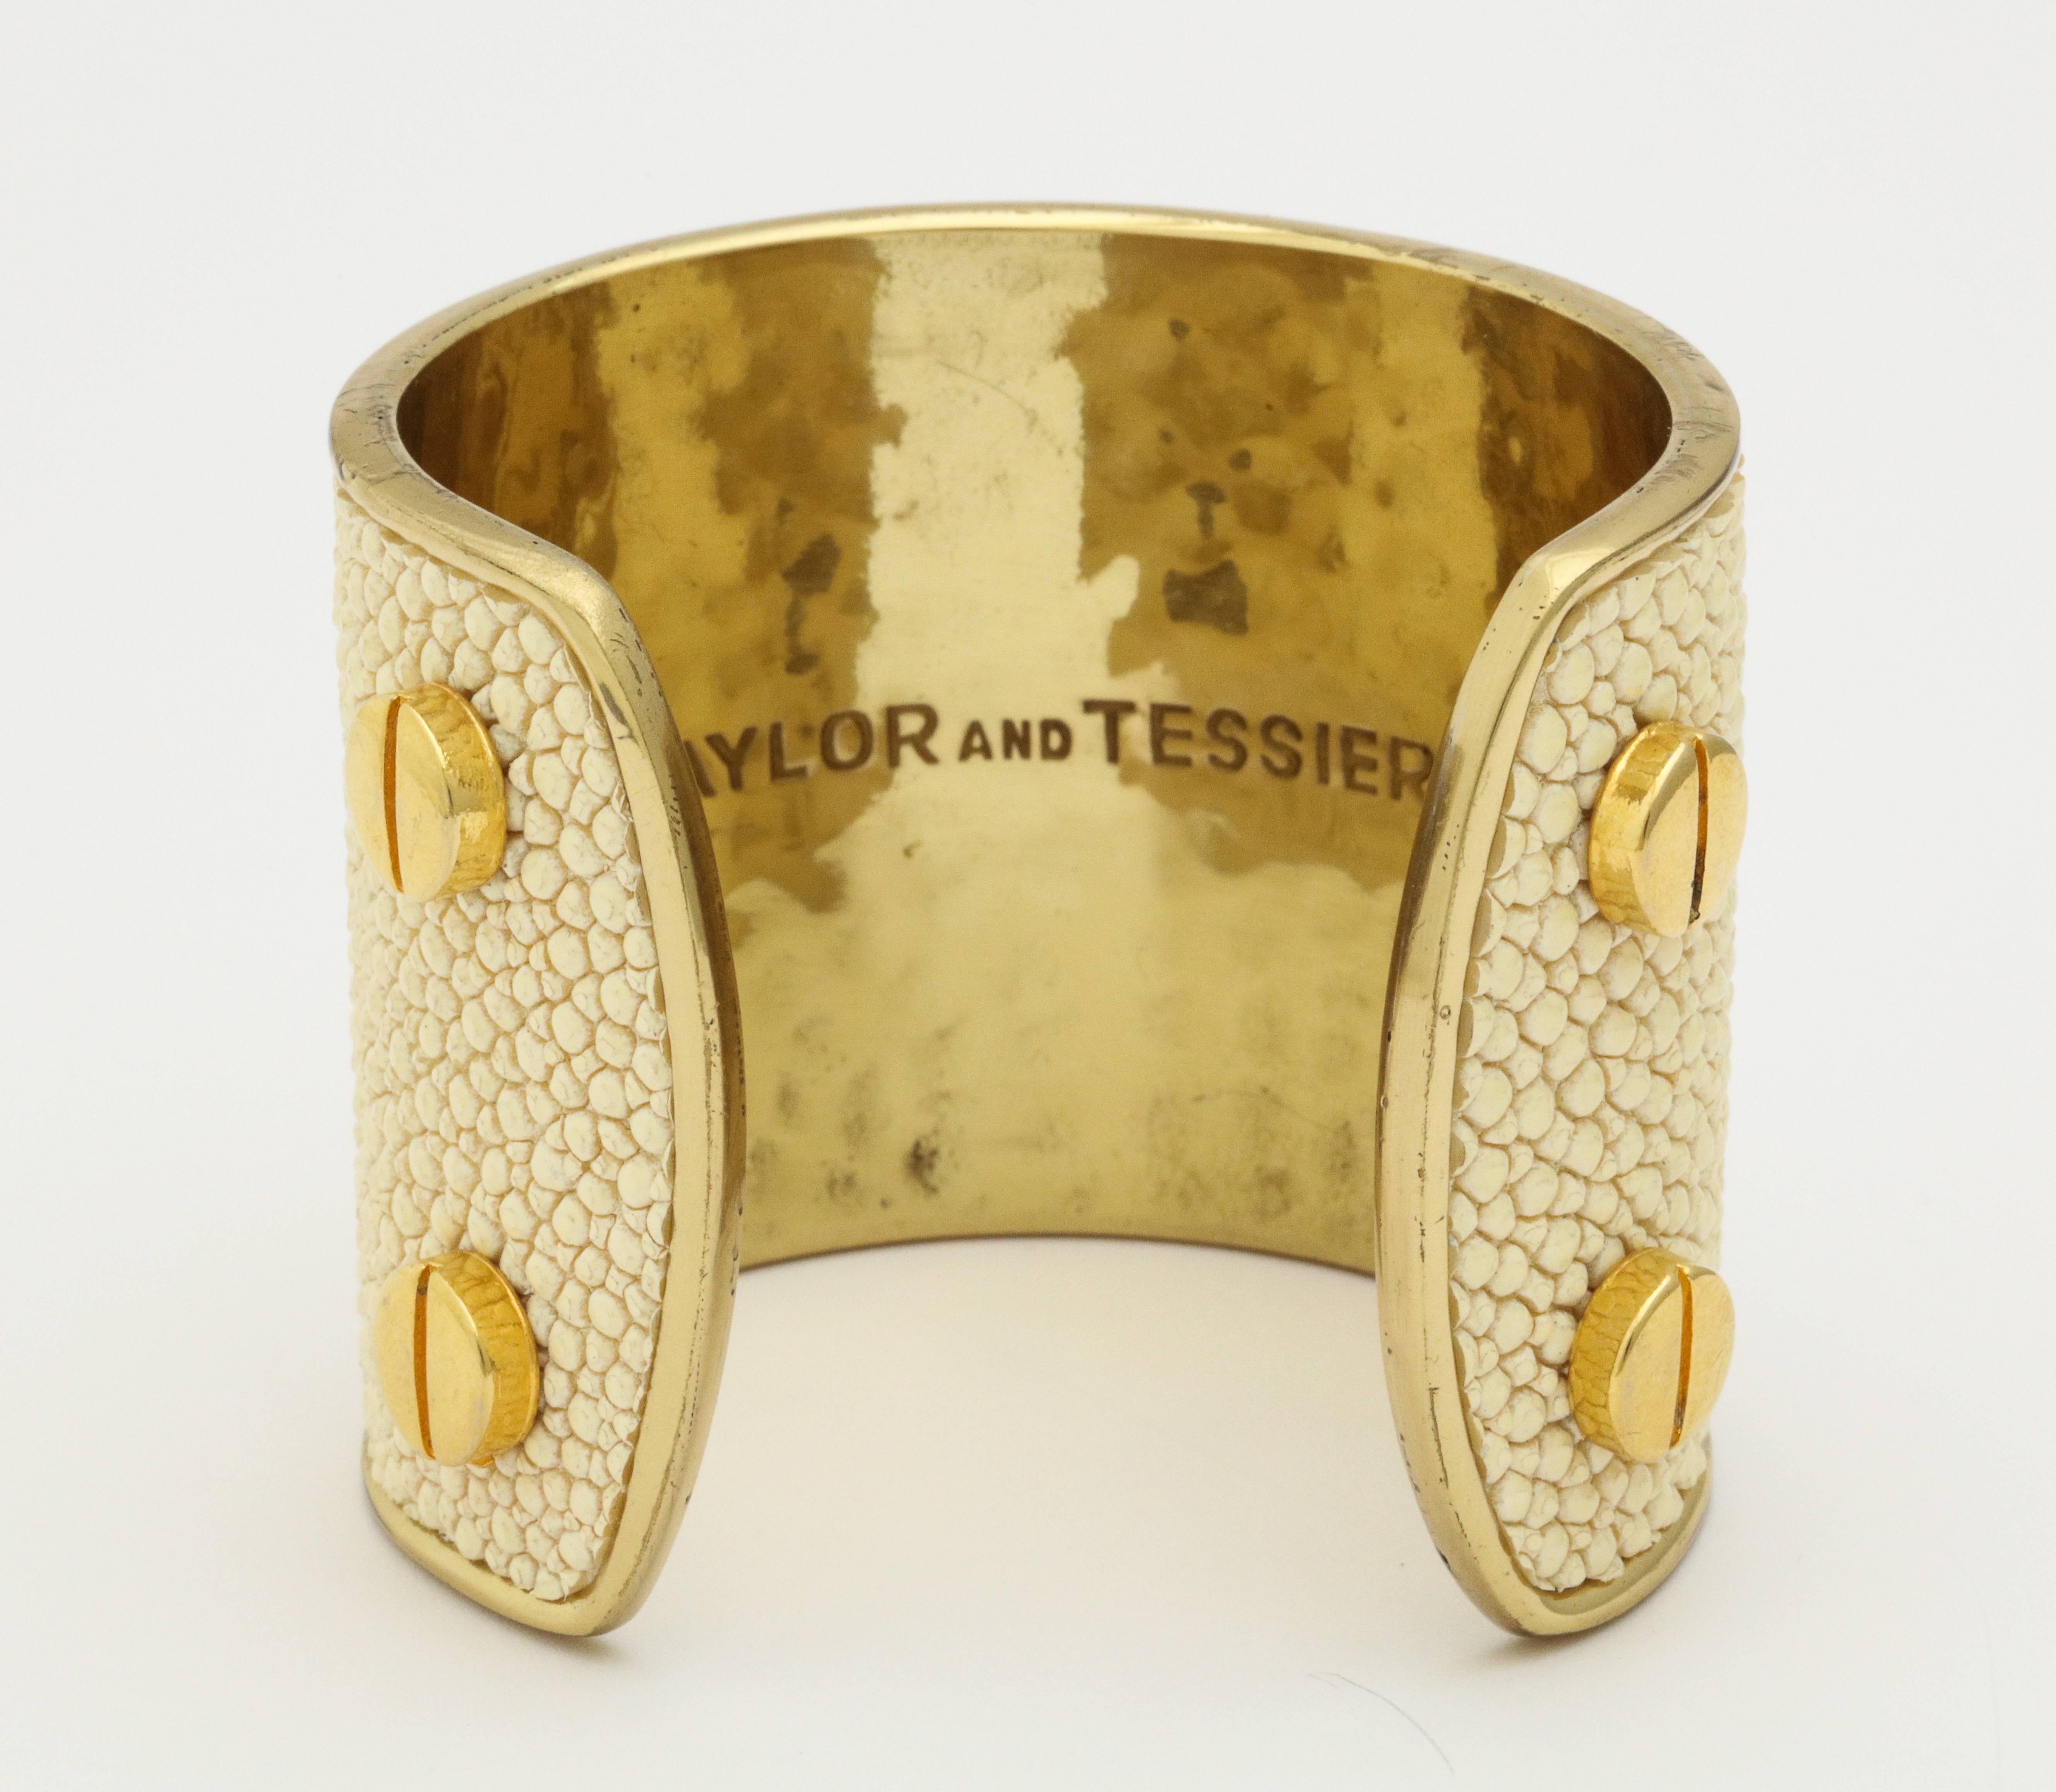 Modernist Taylor and Tessier Faux Shagreen Cuff 